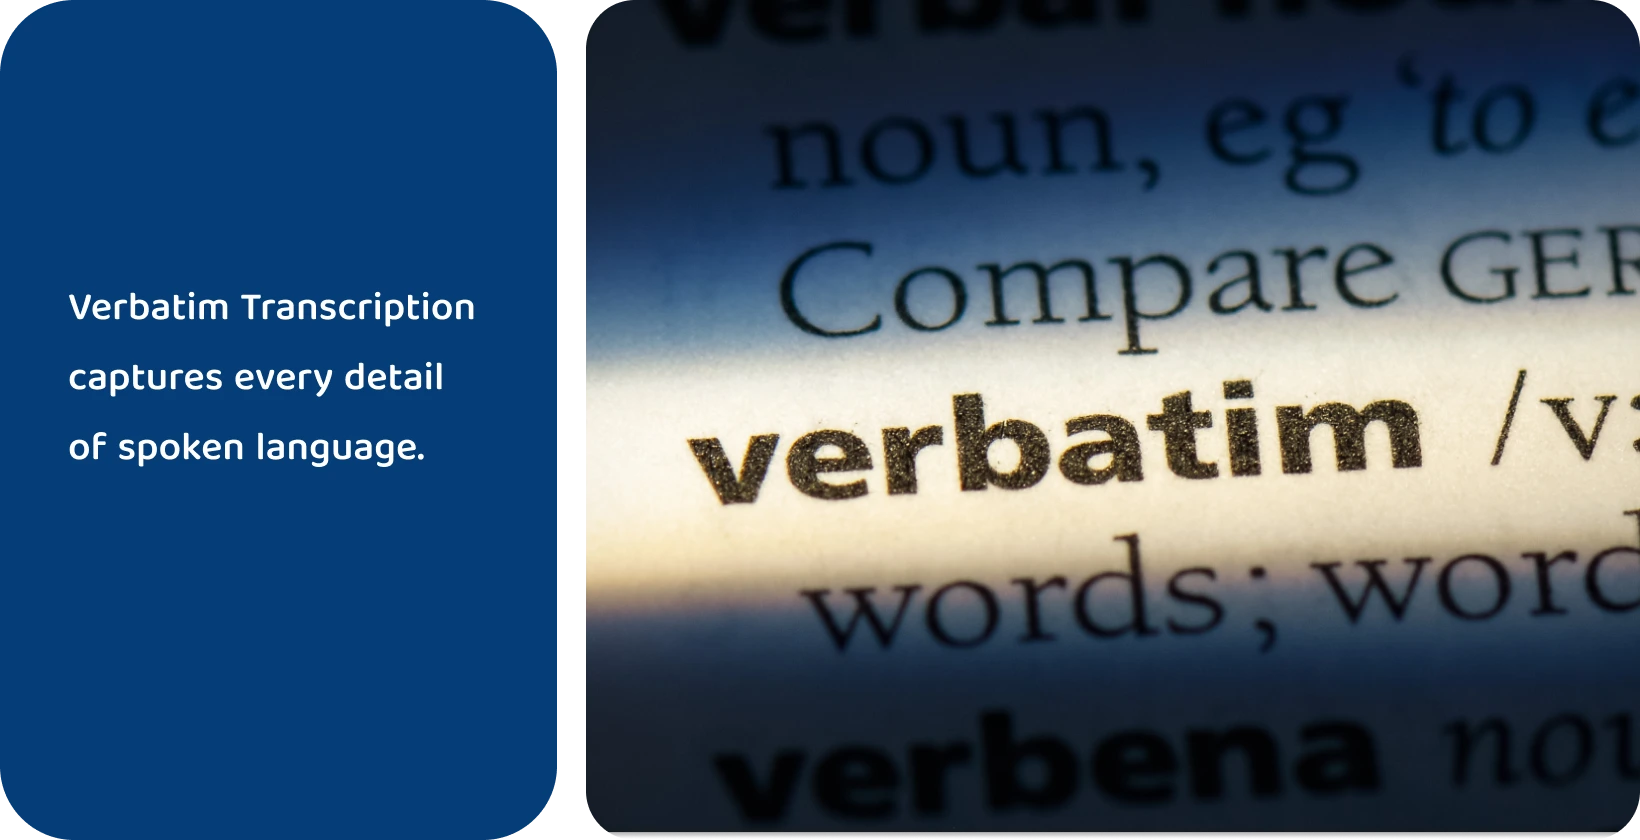 Dictionary entry of the word 'verbatim' highlighted, representing precise transcription methods.